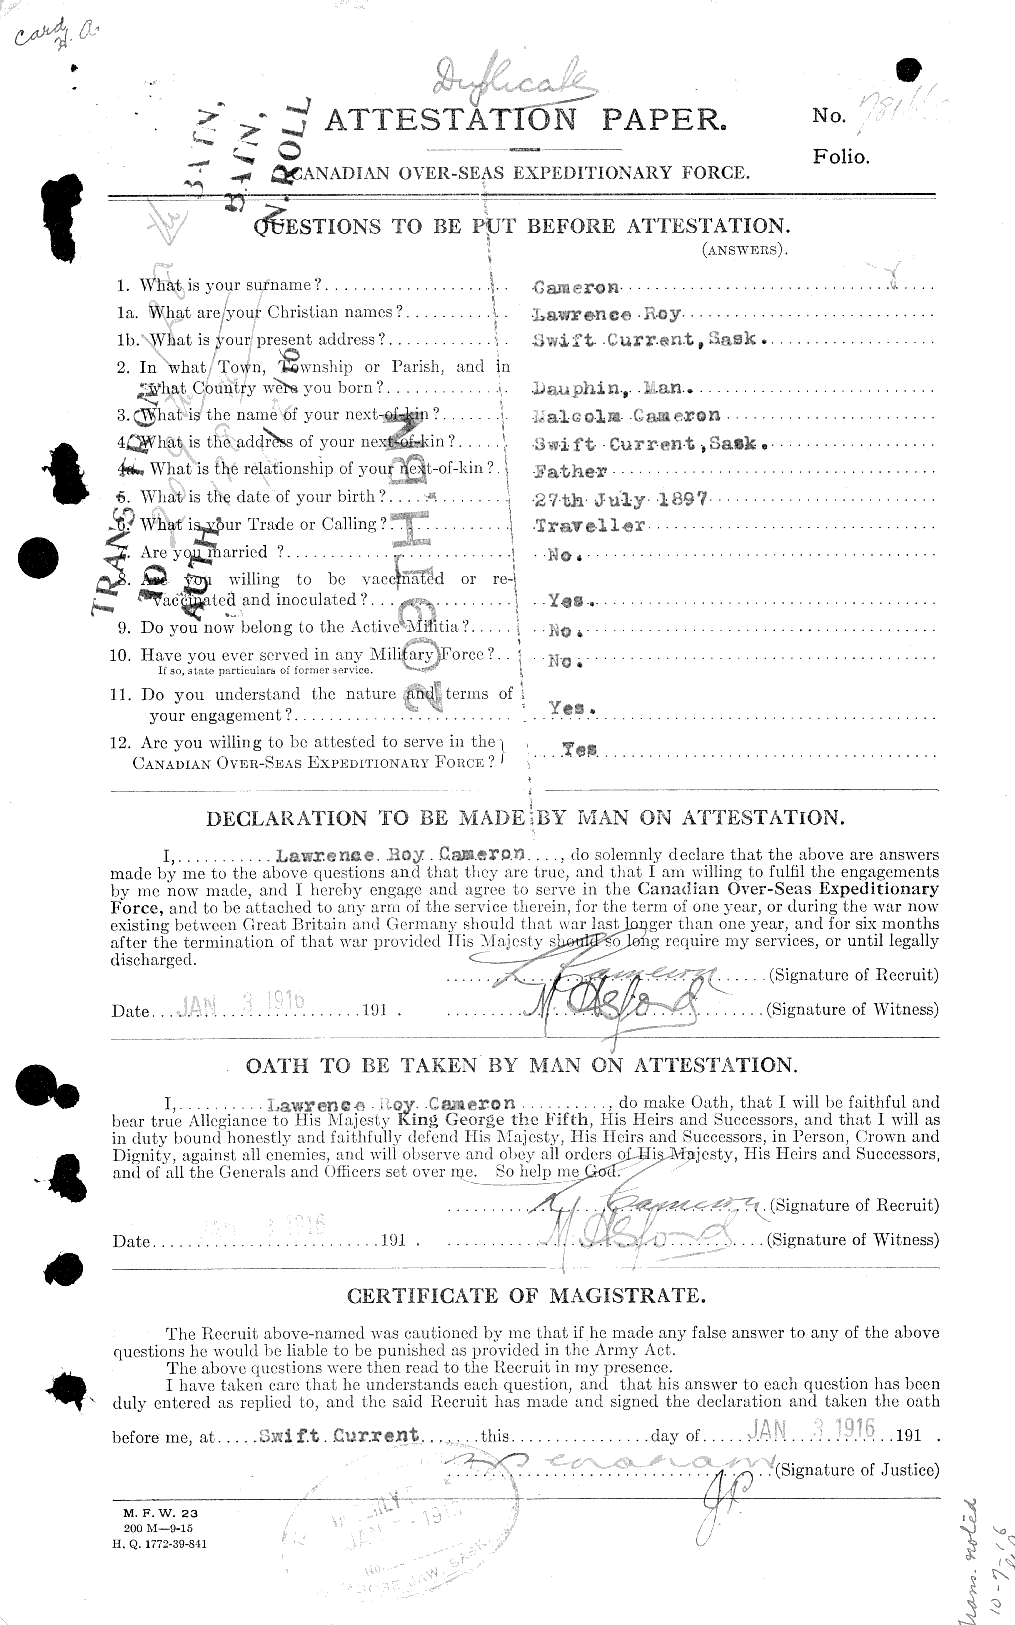 Personnel Records of the First World War - CEF 002387a